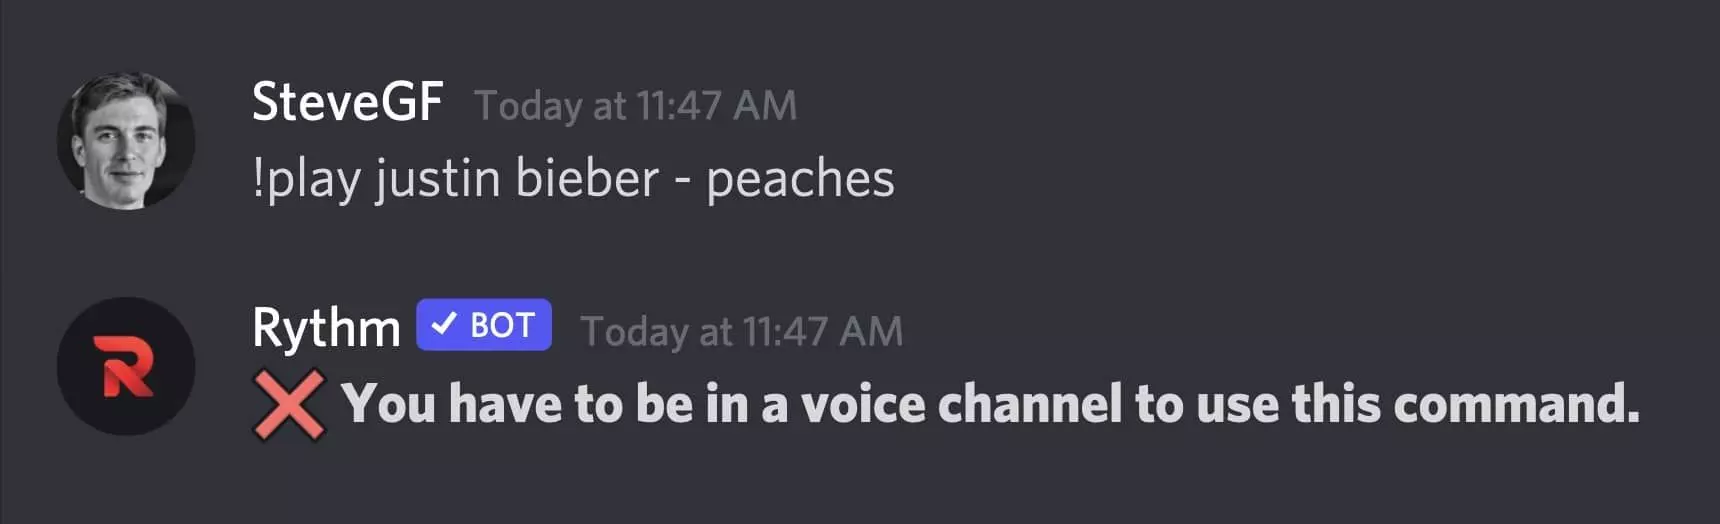 you have to be in a voice channel to use this command